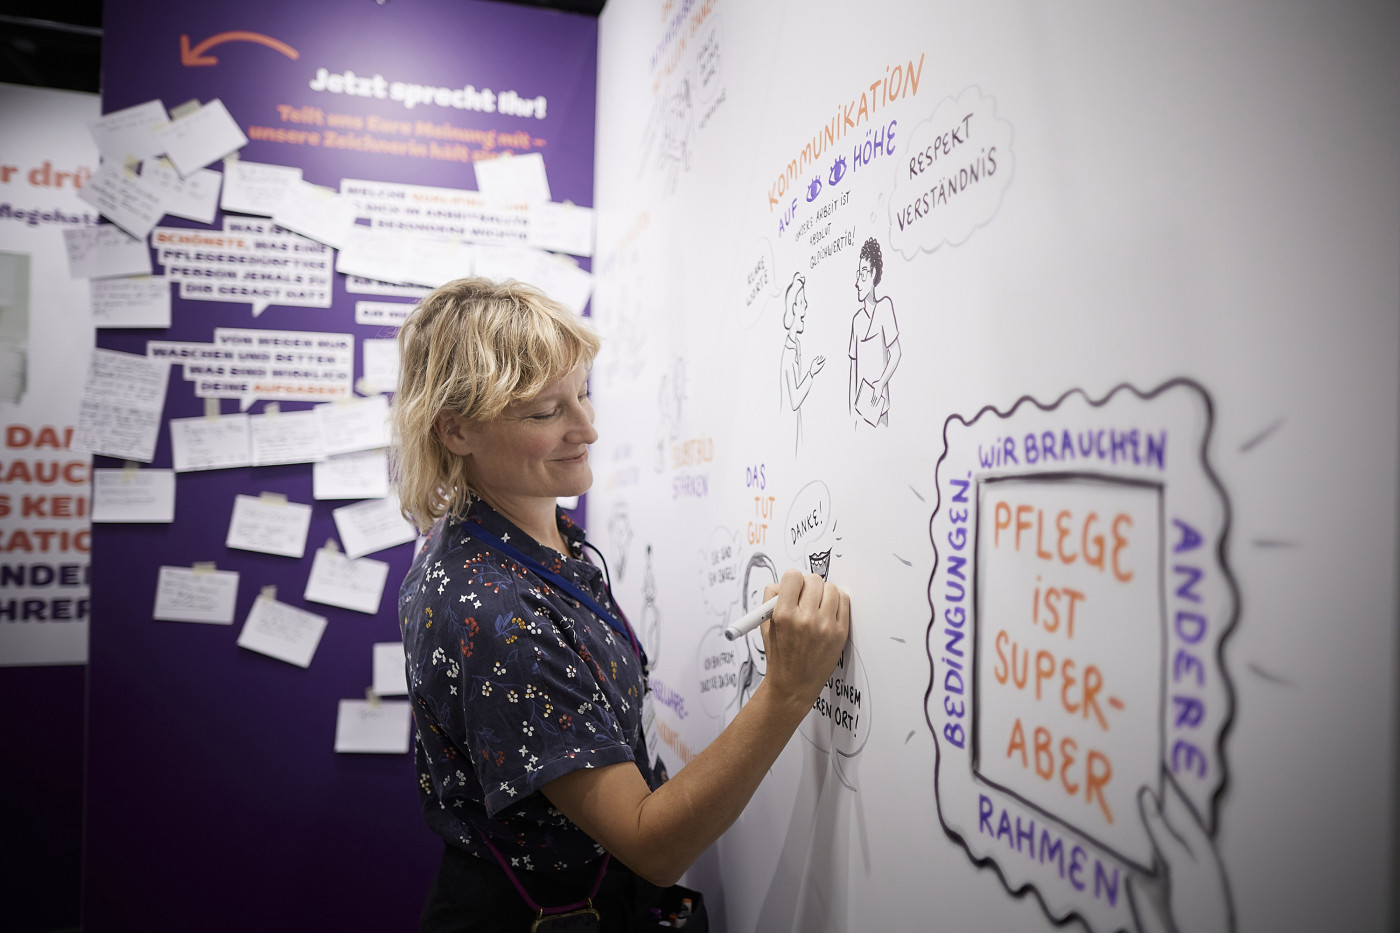 Graphic Recording at the stand of the German Care Network